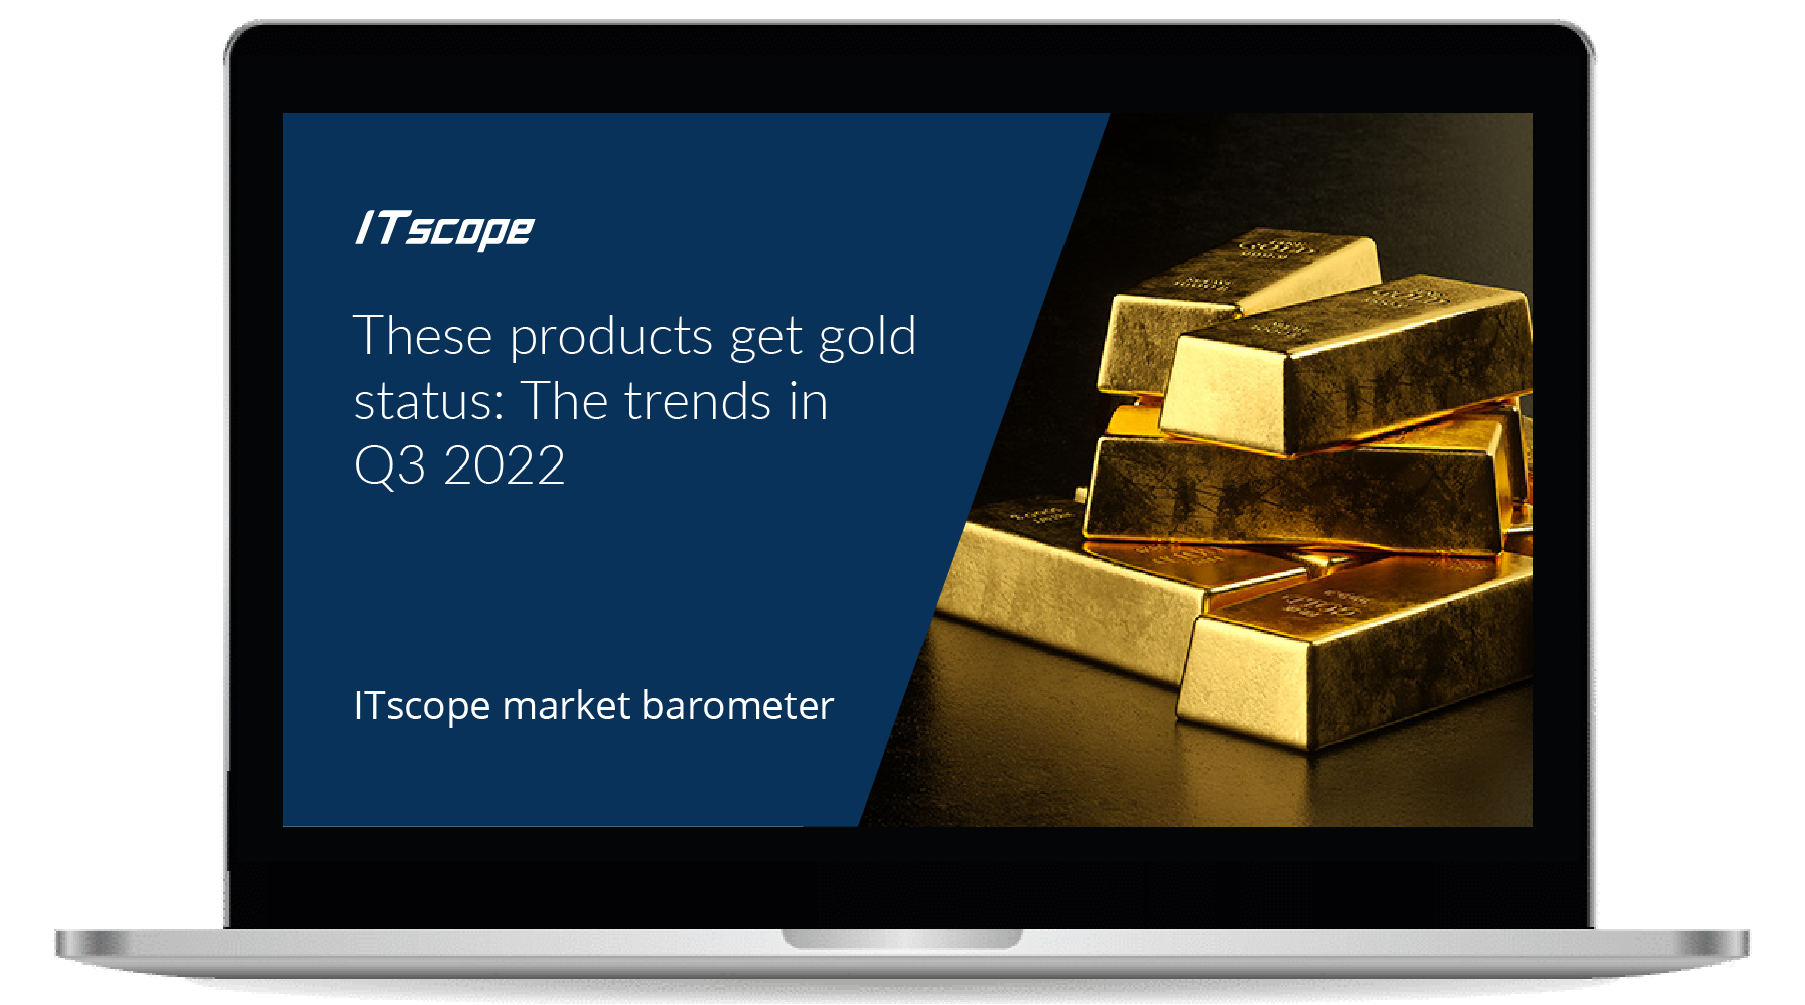 ITscope market barometer: These products get gold status: The trends in Q3 2022